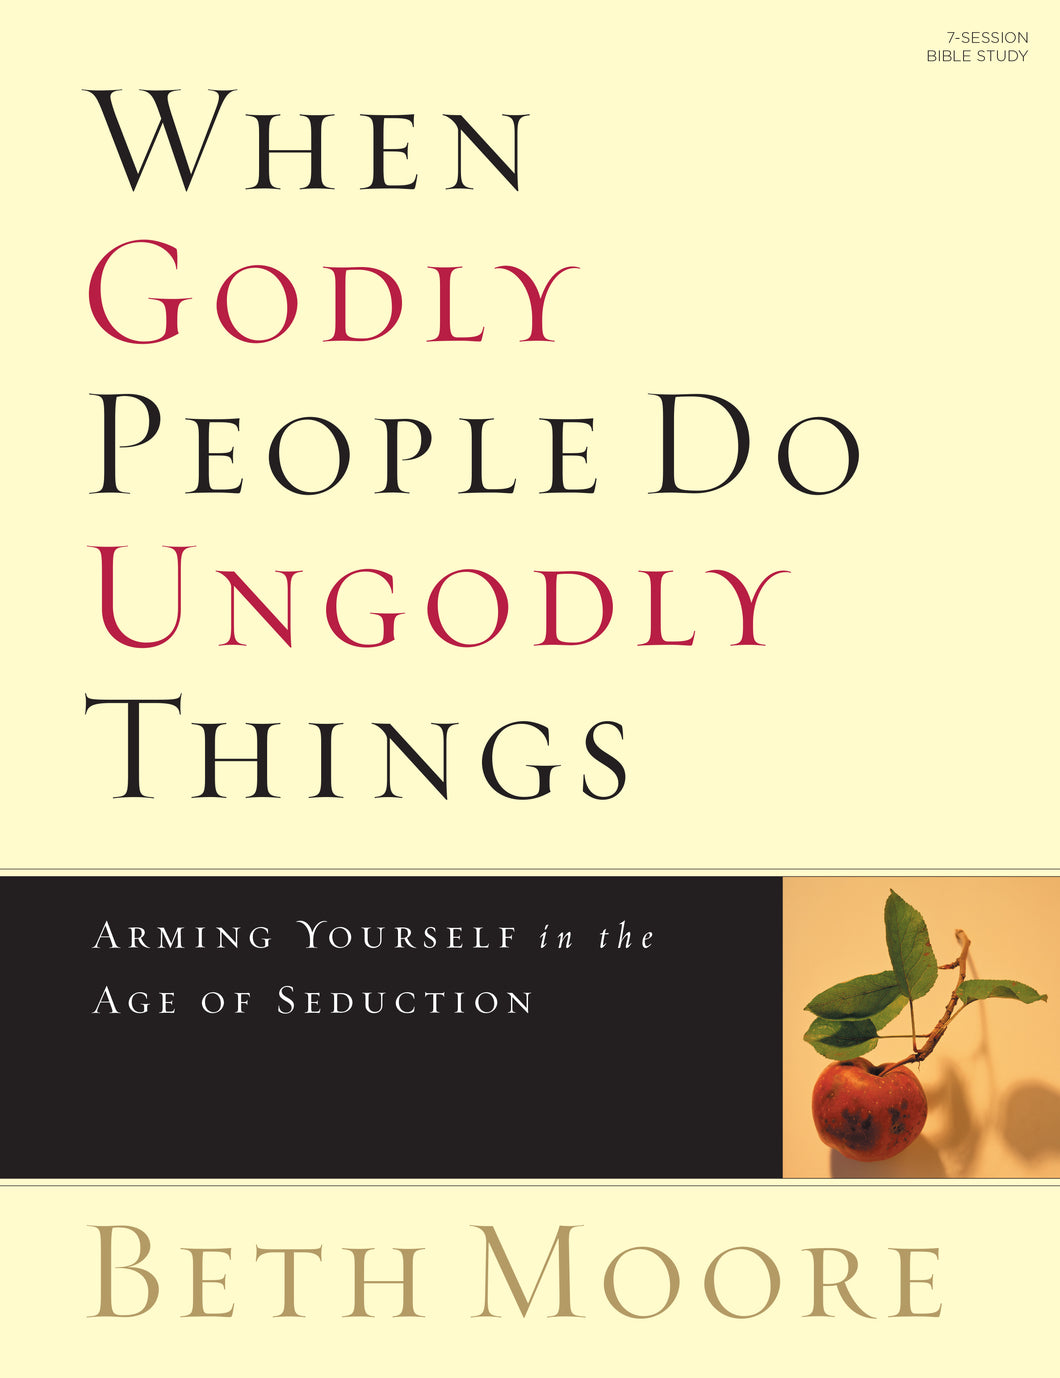 WHEN GODLY PEOPLE DO UNGODLY THINGS - Bible Study Book